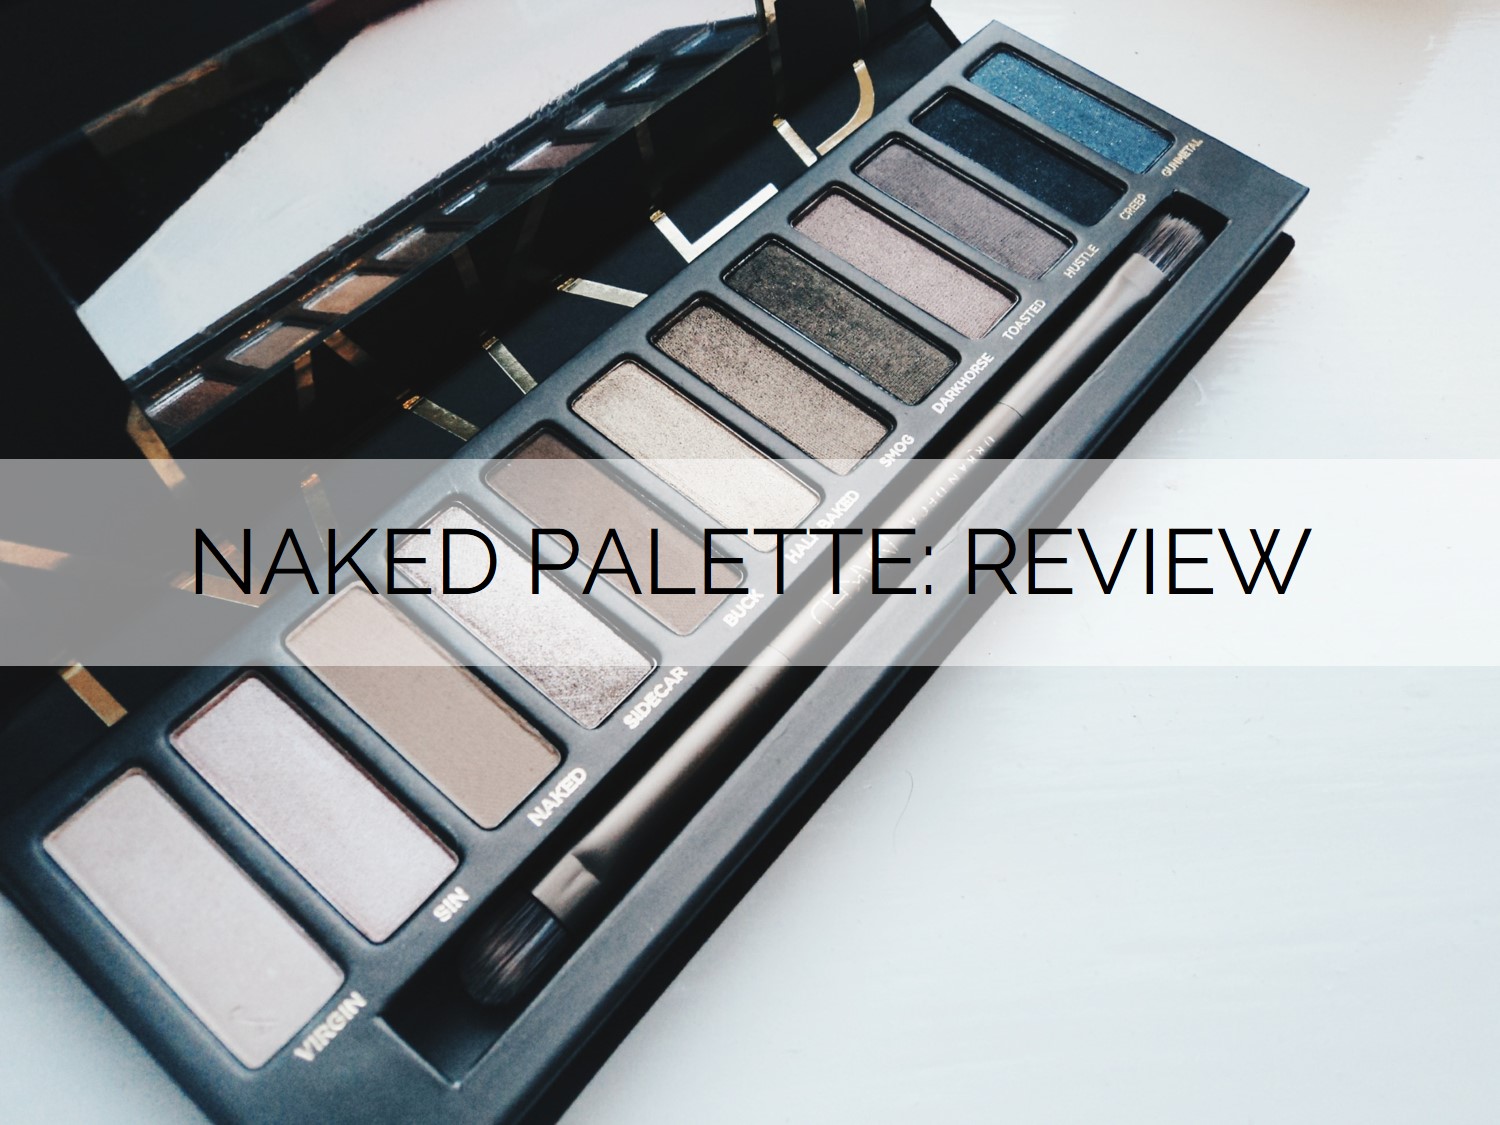 Naked Palette Review